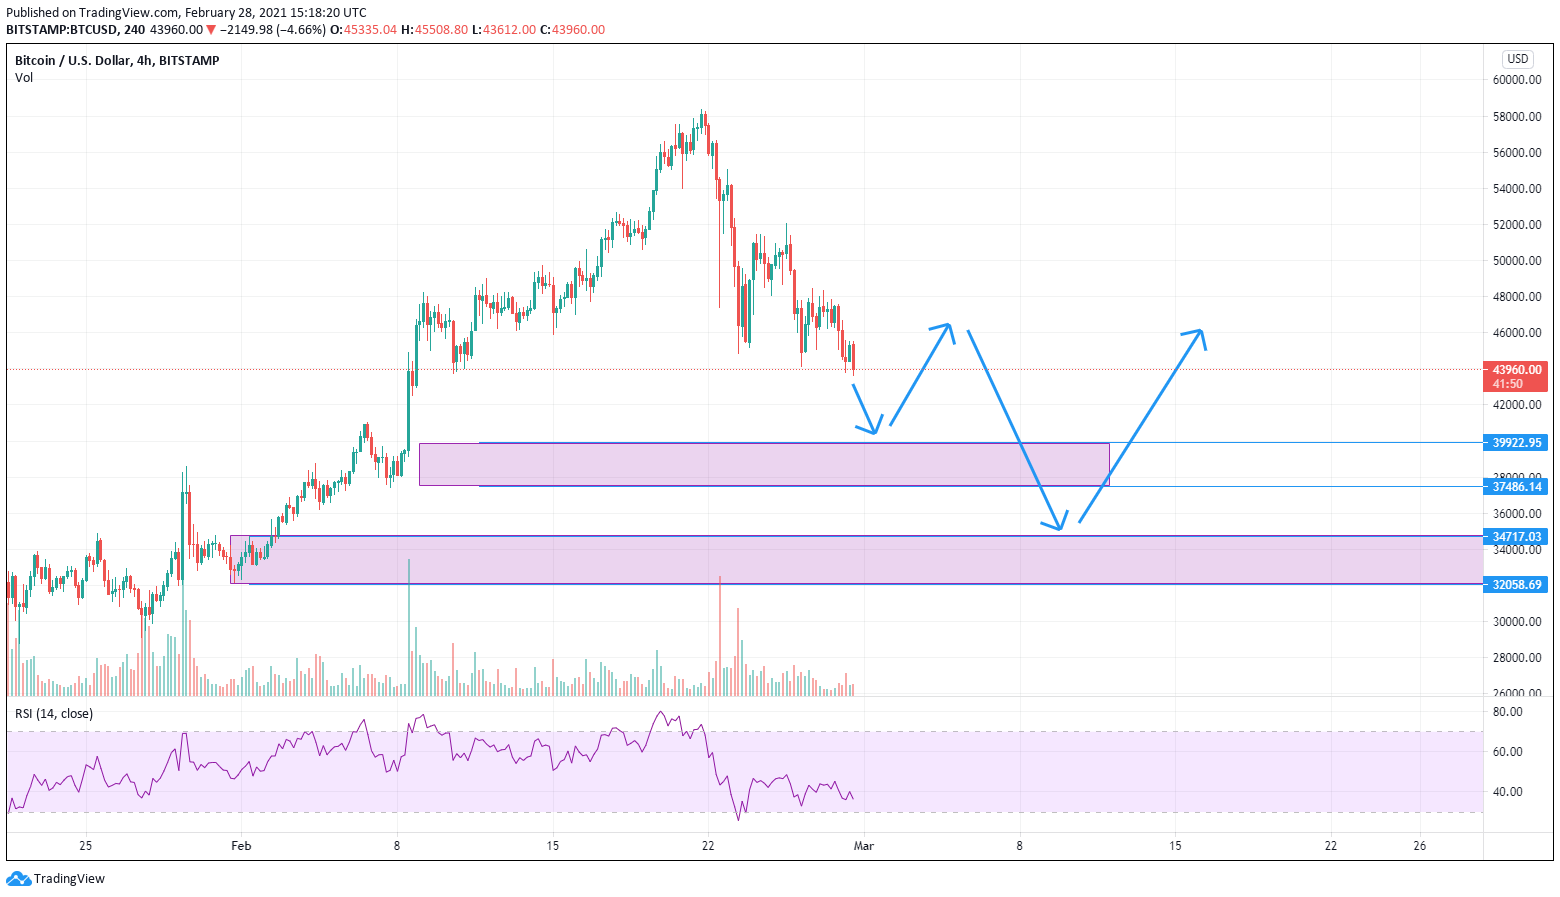 BTCUSD Overview/Forecast for March 2021